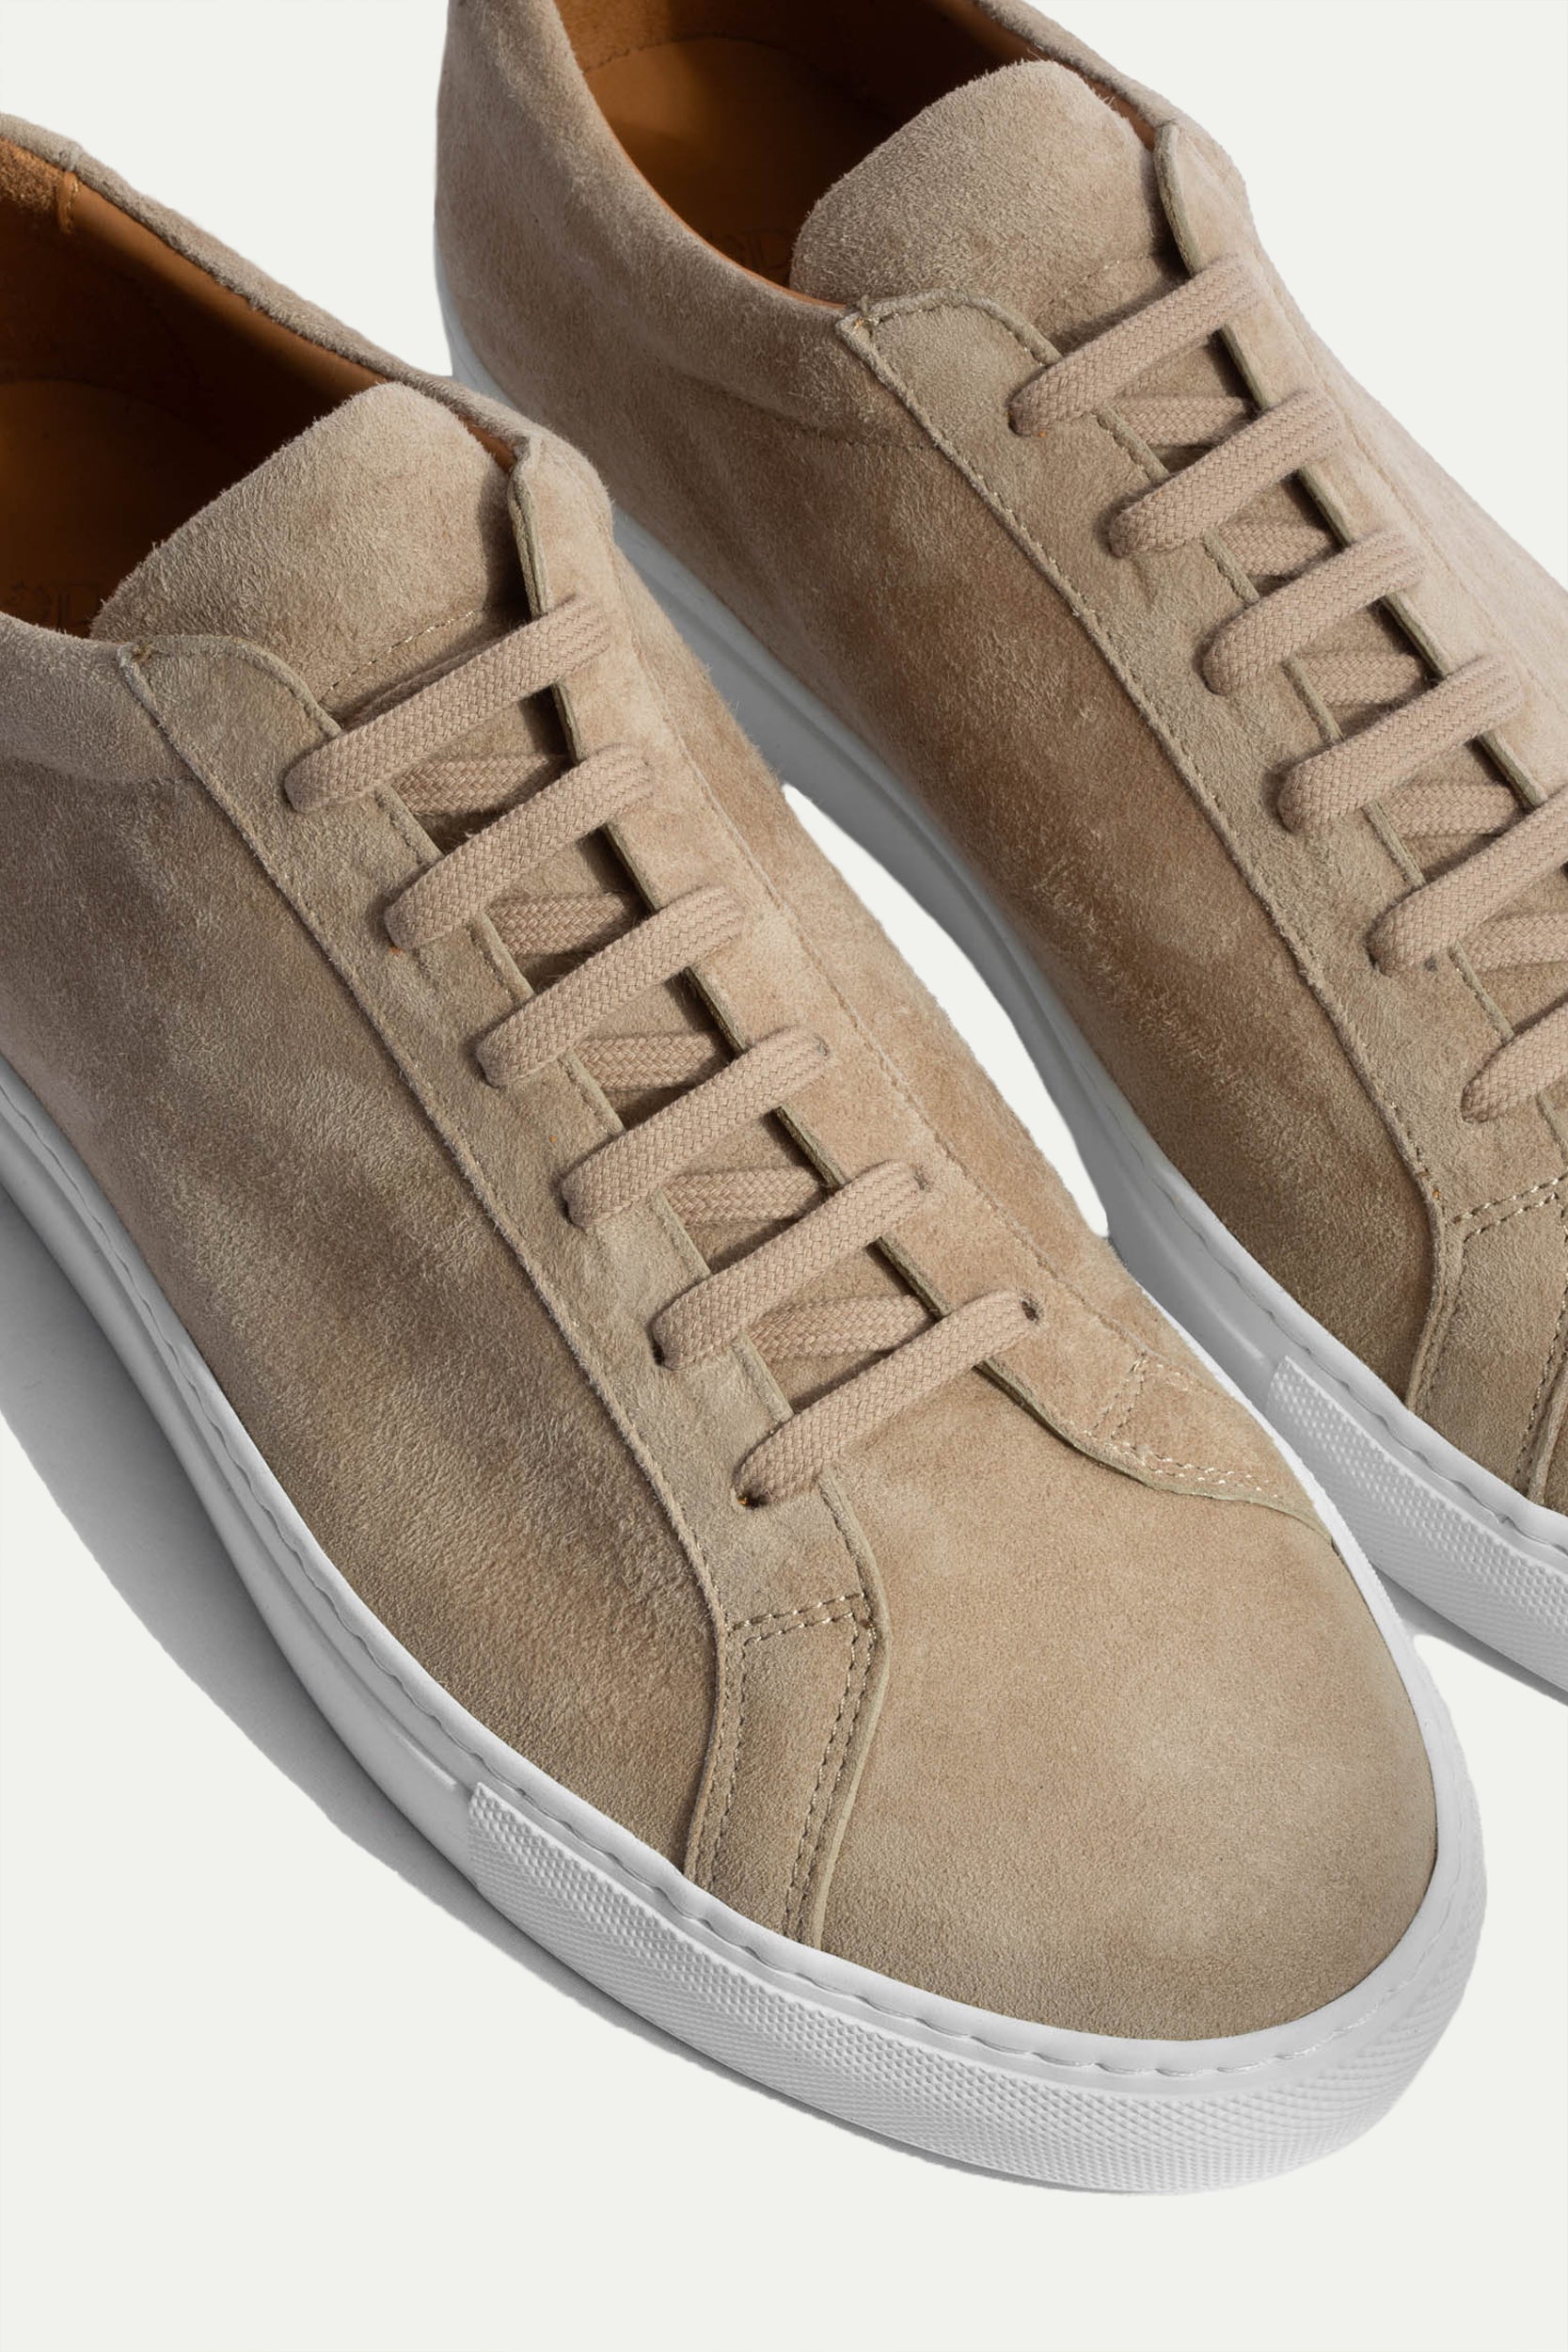 sneaker beige, sneakers beige, sneakers beige pour homme, sneakers en cuir beige, luxury sneakers, sneakers italiennes, chaussures casual italiennes beige, Sneakers beige, sneakers beige, sneakers beige da uomo, sneakers beige in pelle, sneakers di lusso, sneakers italiane, scarpe casual beige italiane, Beige sneakers, beige sneakers, beige sneakers for men,beige leather sneakers, luxury sneakers, italian sneakers, beige italian casual shoes,